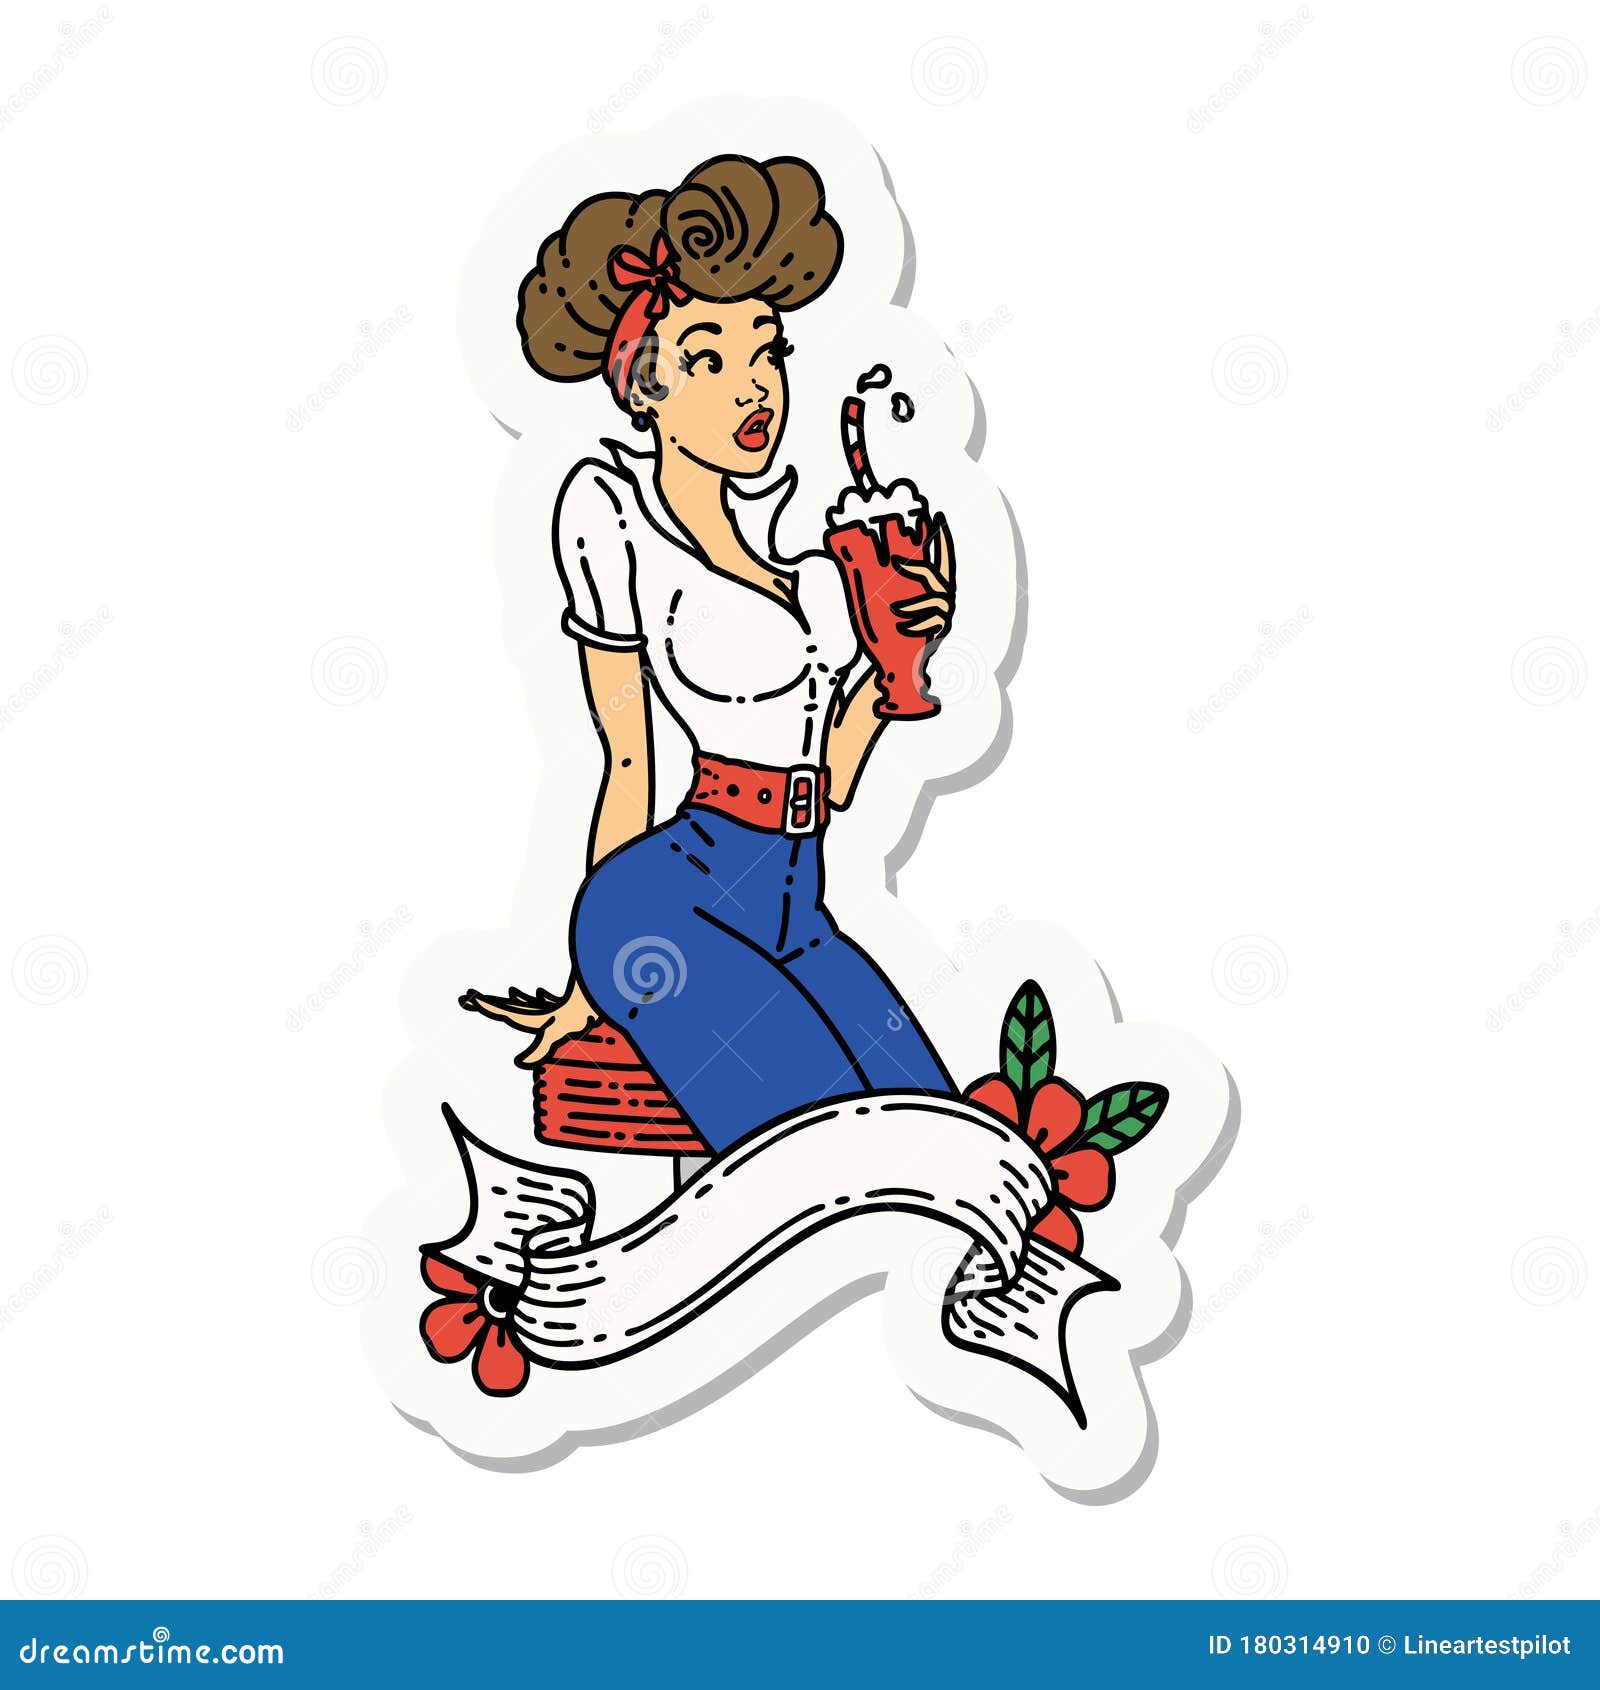 pinup girl clipart